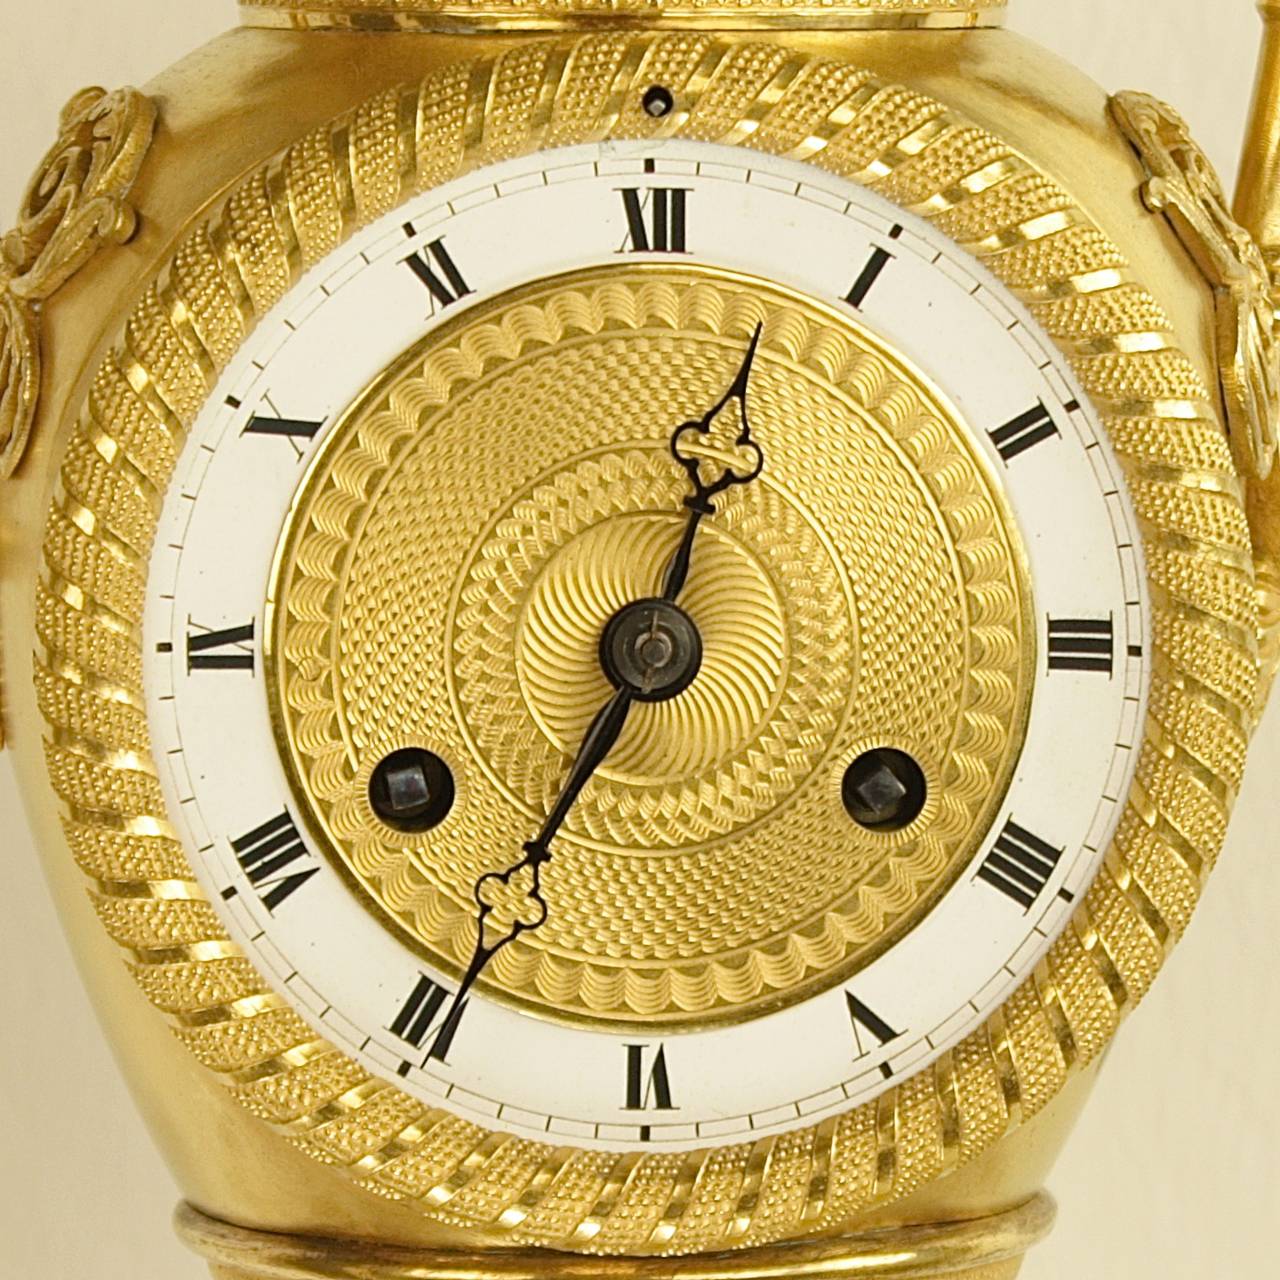 Early 19th century French Empire Ormolu Vase-Shaped Removable Lid Mantle Clock

An Empire ormolu mantle clock, the white enamel and guilloche gilt-bronze dial with Roman numerals within a urn-shaped case surmounted by two scrolled handles,